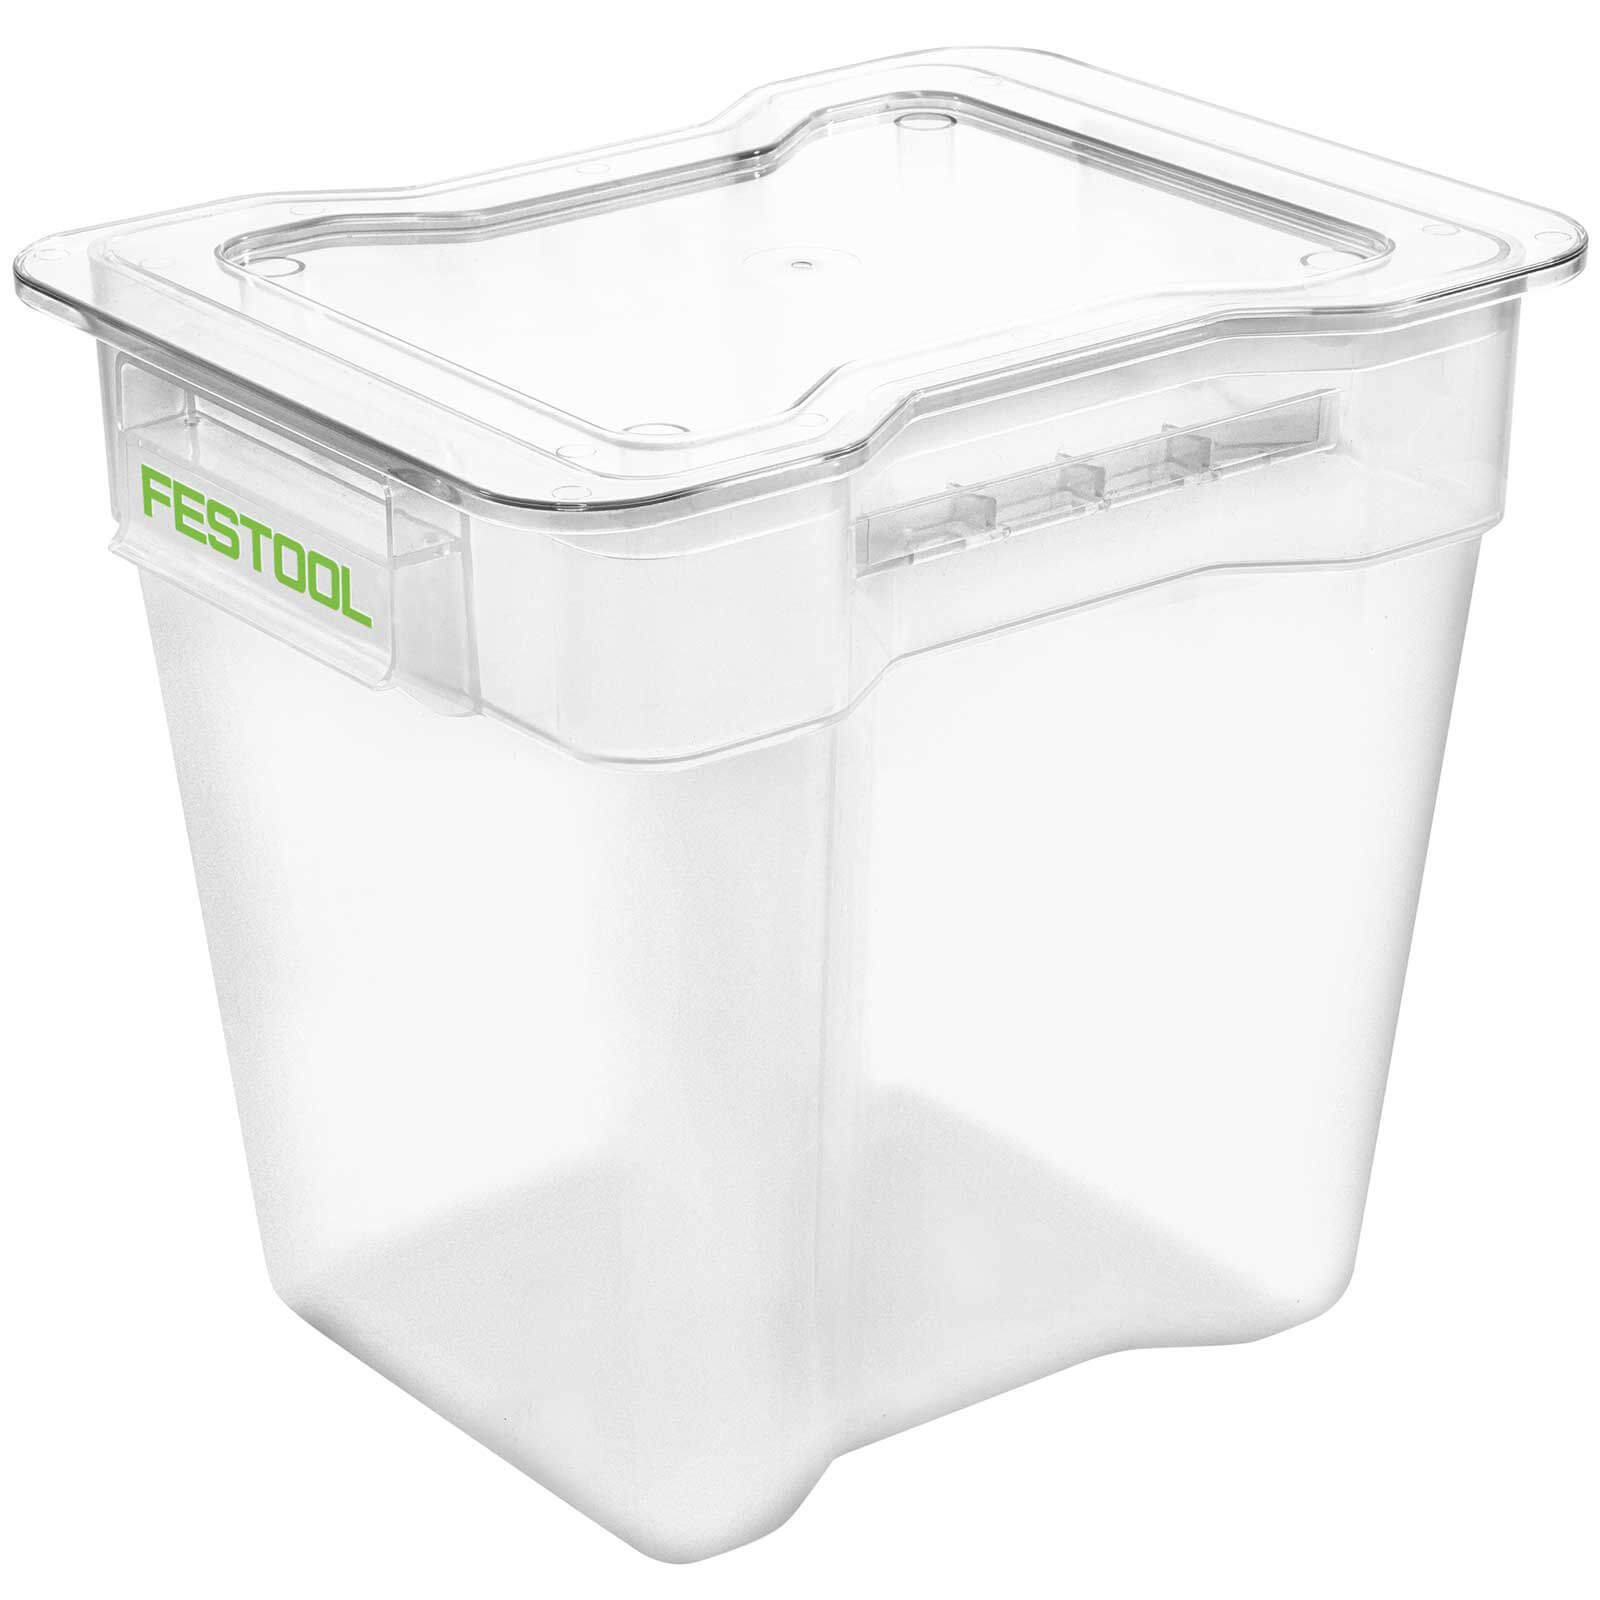 Image of Festool Container for CT-VA 20 Pre Separator Pack of 1